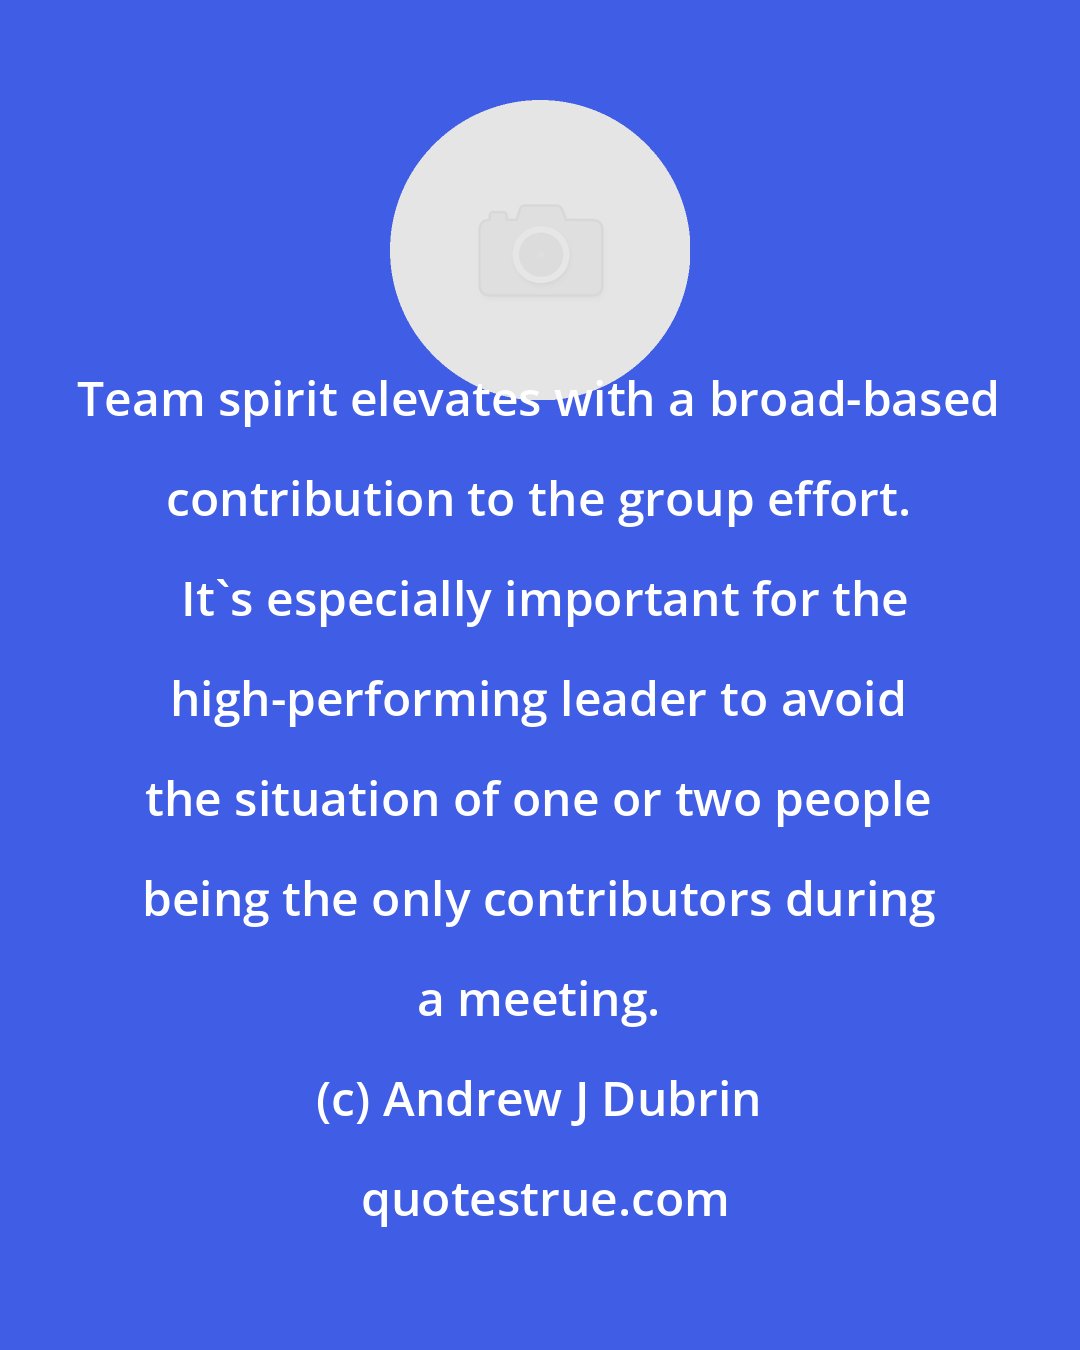 Andrew J Dubrin: Team spirit elevates with a broad-based contribution to the group effort.  It's especially important for the high-performing leader to avoid the situation of one or two people being the only contributors during a meeting.